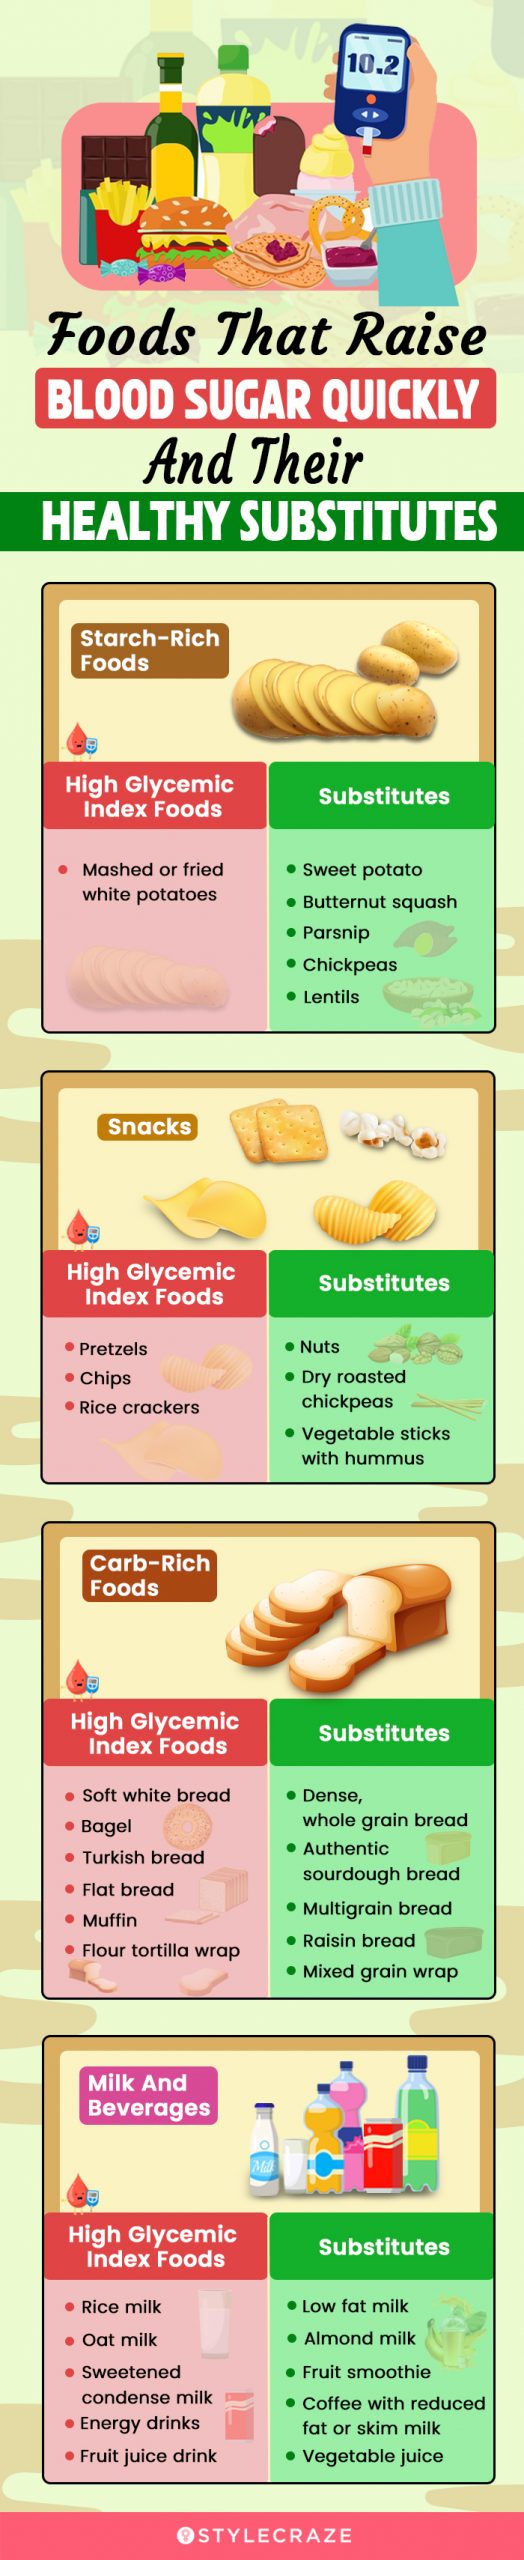 foods that raise blood sugar quickly and their healthy substitutes (infographic)